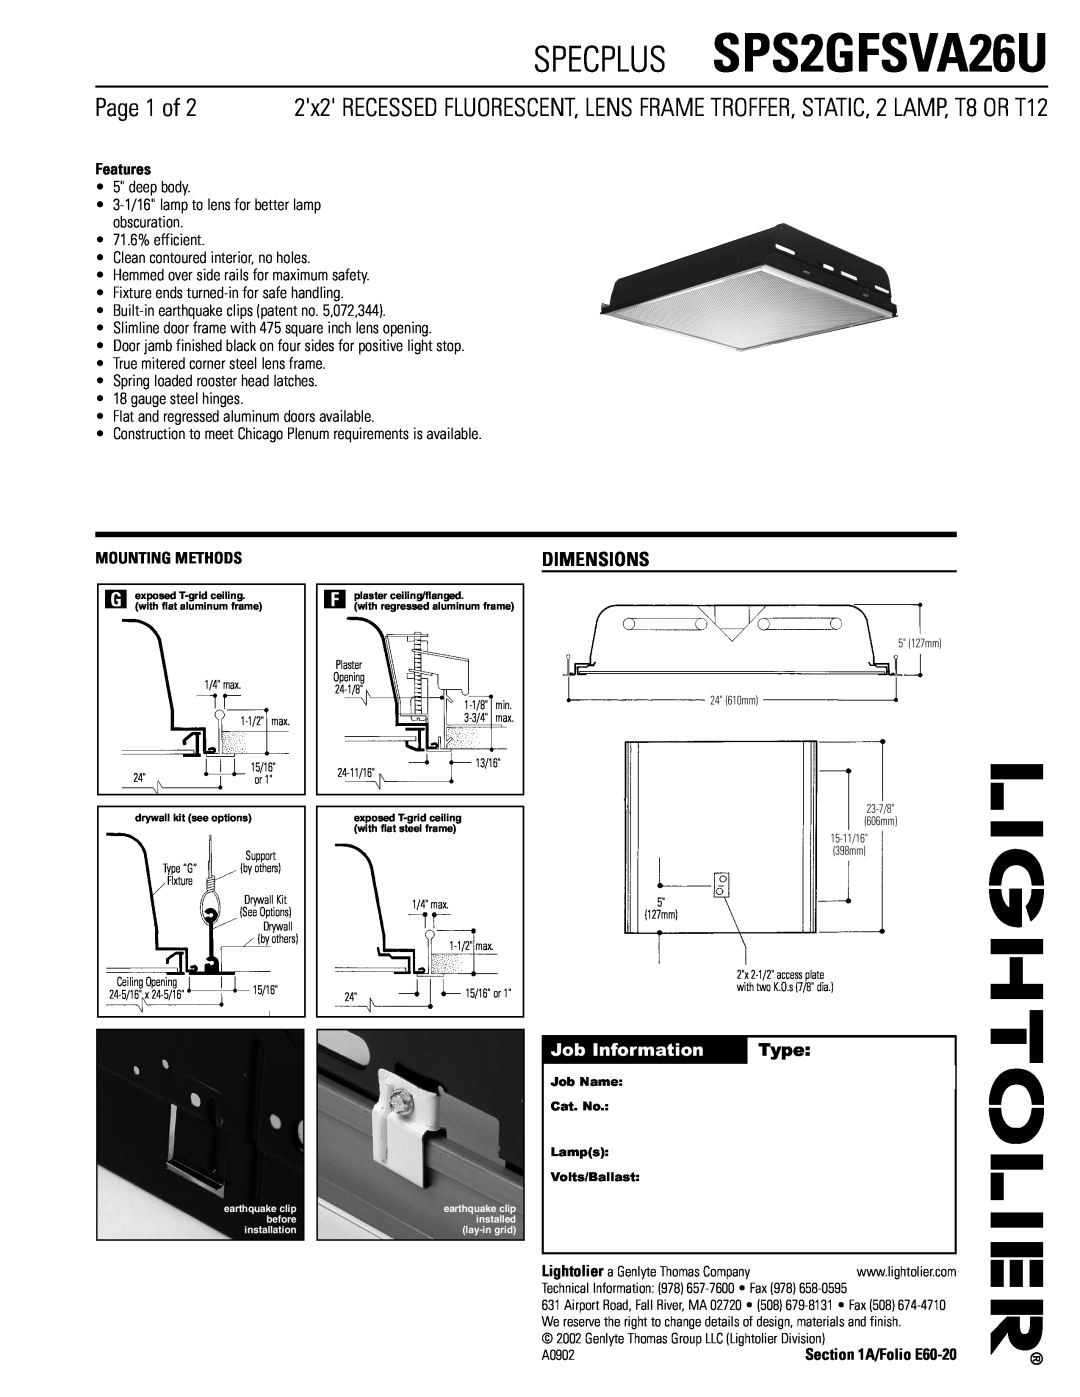 Lightolier dimensions SPECPLUS SPS2GFSVA26U, Page 1 of, Dimensions, Job Information, Type, Features, Mounting Methods 